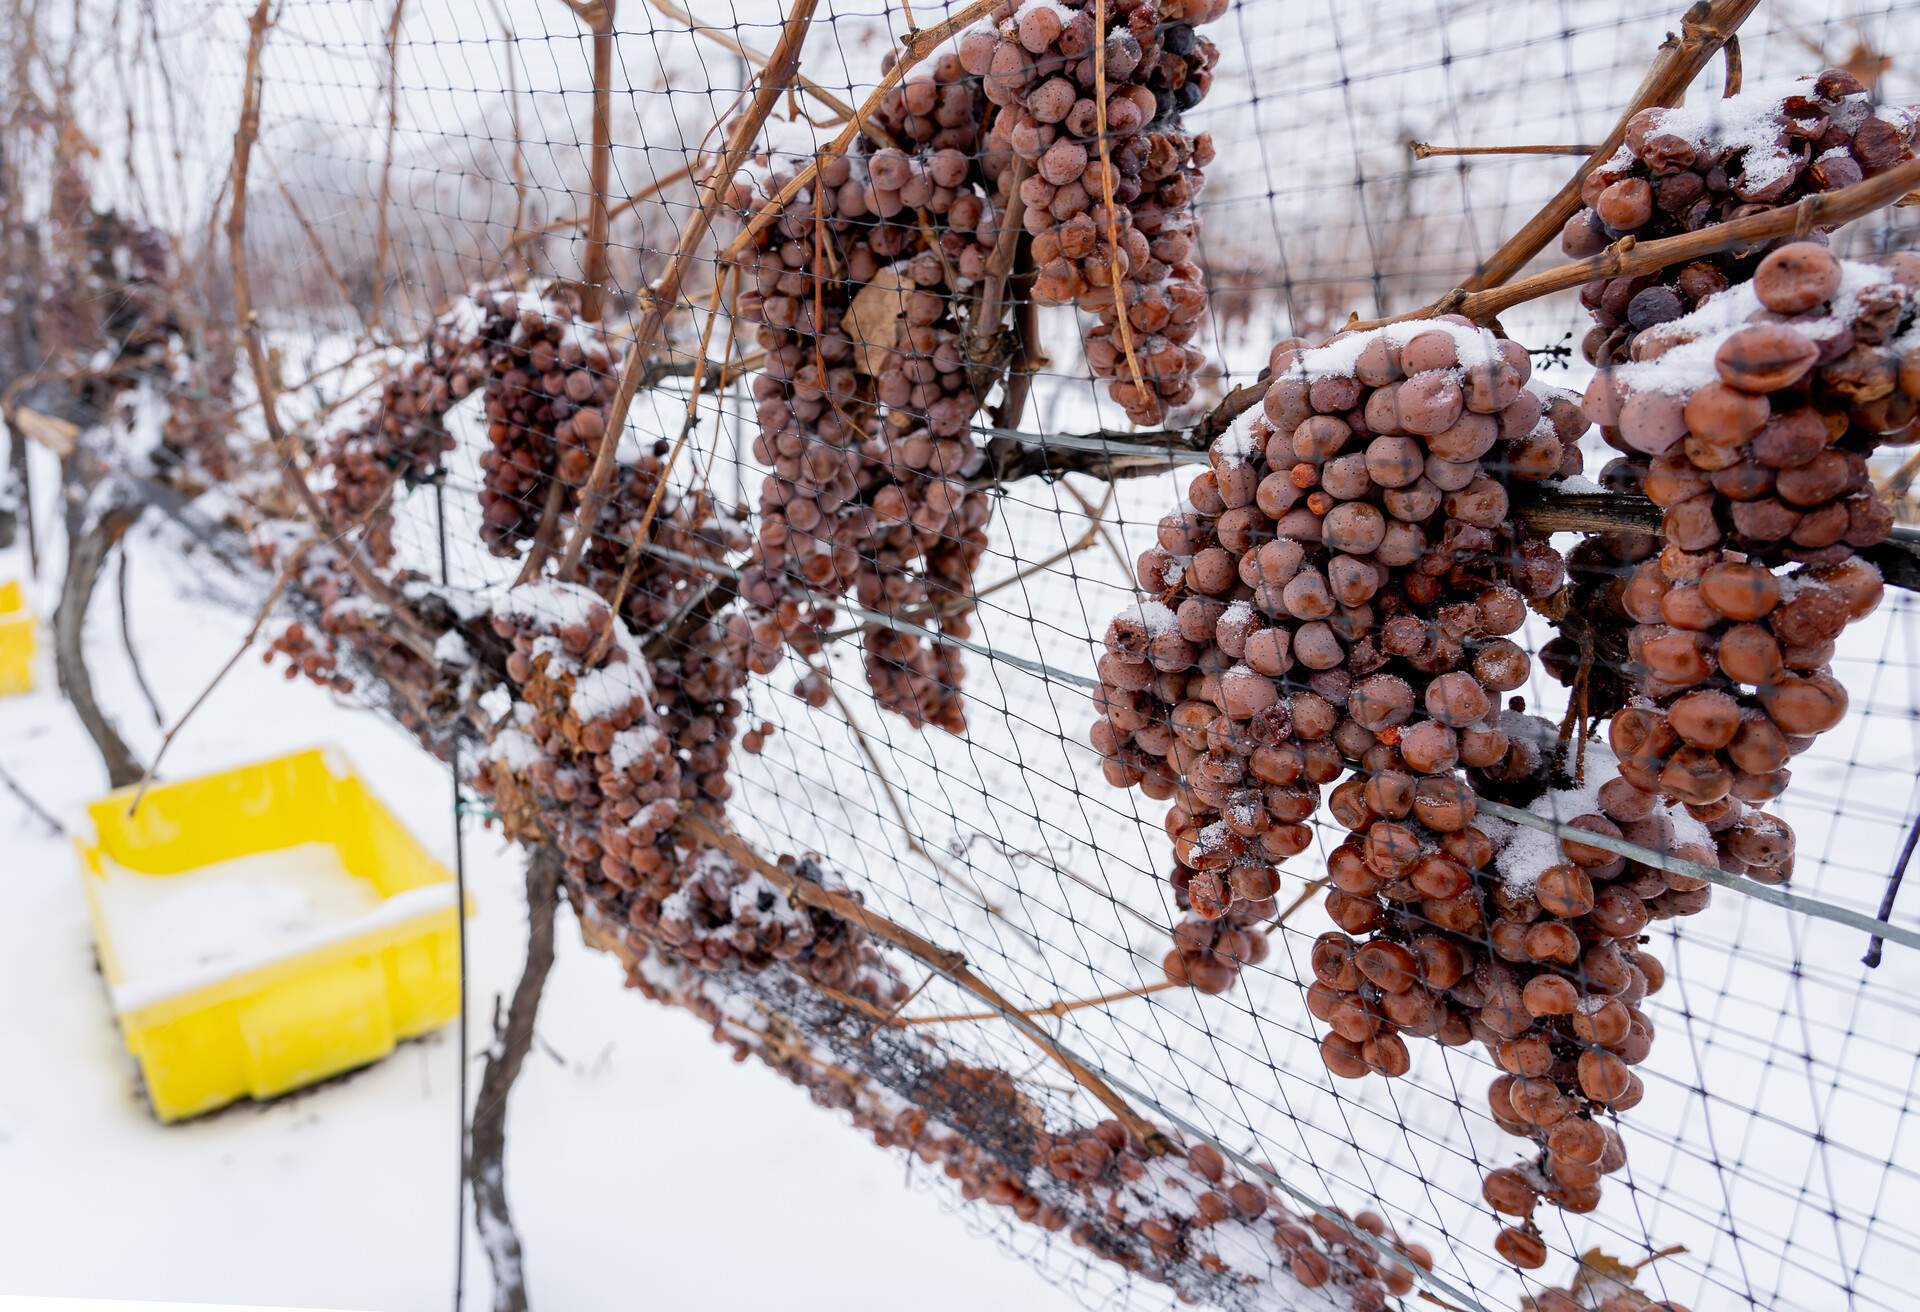 Snow covered frozen grapes on the vine for ice wine in the vineyard at Niagara on the Lake area, Ontario, Canada. Icewine is a type of dessert wine produced from frozen grapes on the vine.